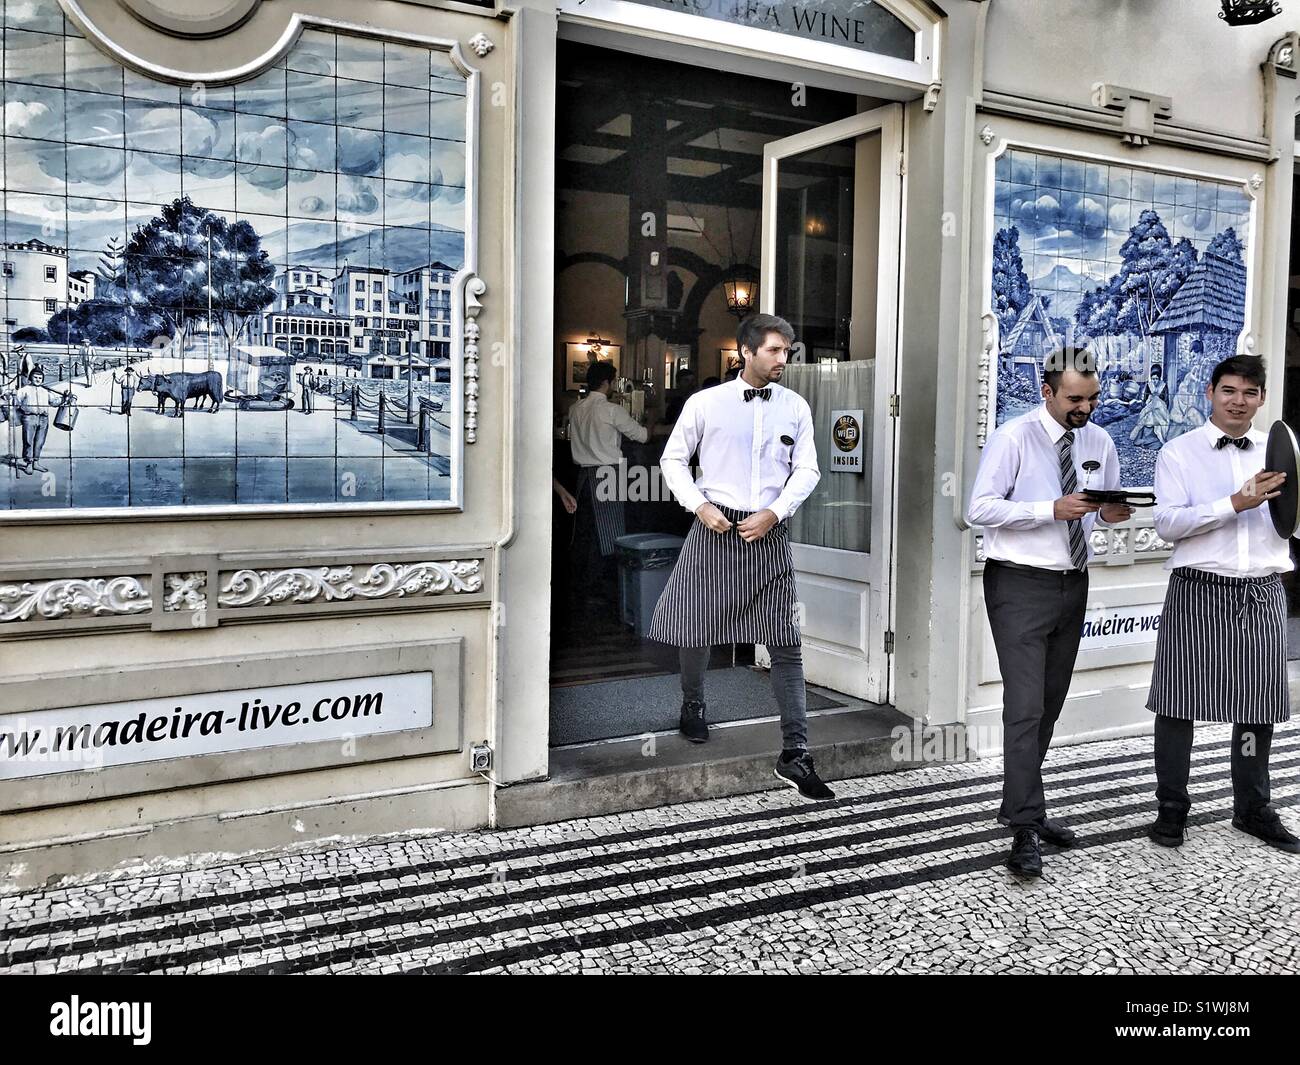 Waiters in the doorway, plus blue and white handmade glazed tiled pictures, azulejos, decorating the facade of The Ritz Hotel, Funchal, Madeira, Portugal Stock Photo